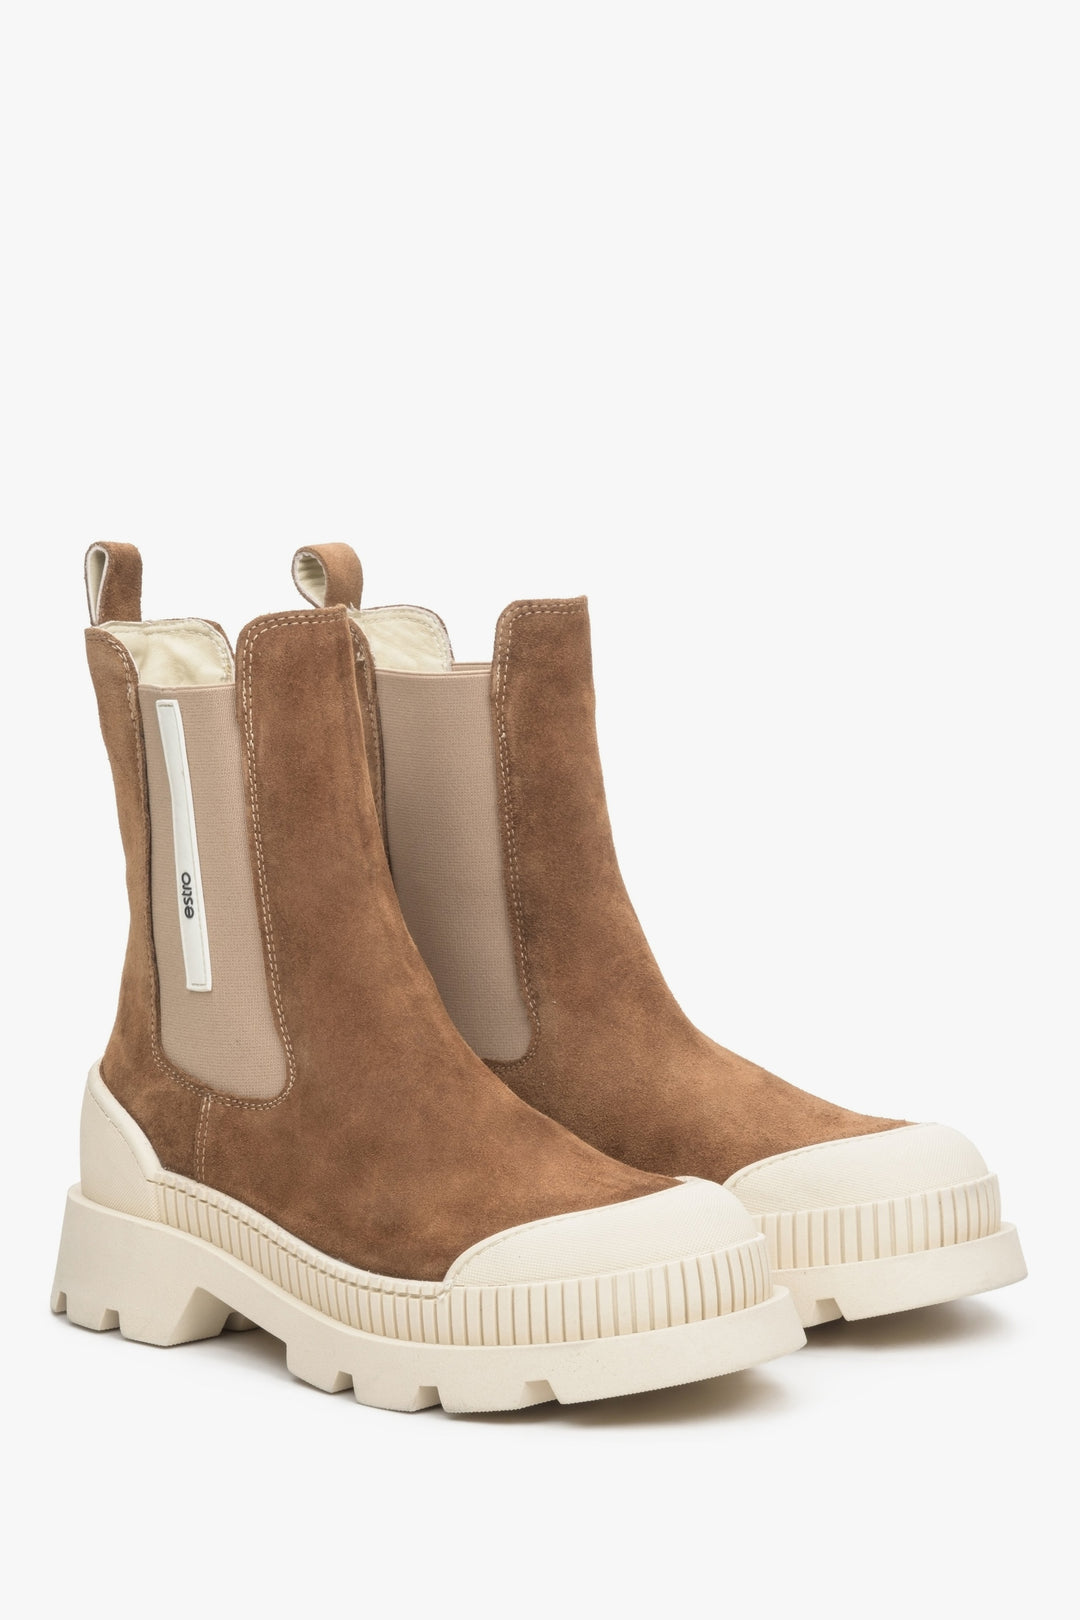 Brown and beige velour and leather Estro women's Chelsea boots.